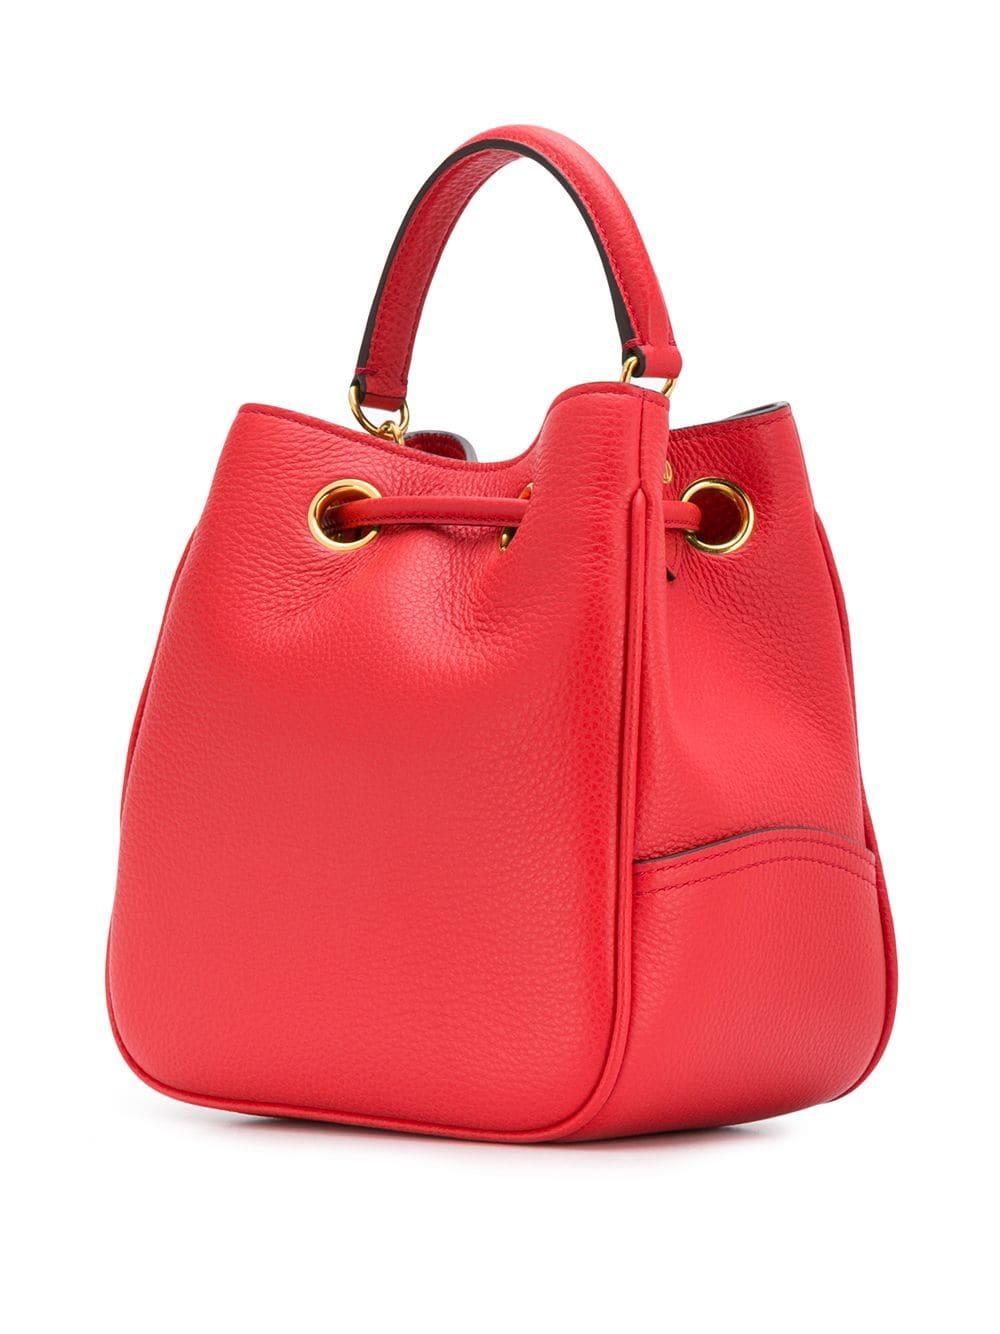 Mulberry Small Hampstead Bucket Bag in Red - Lyst